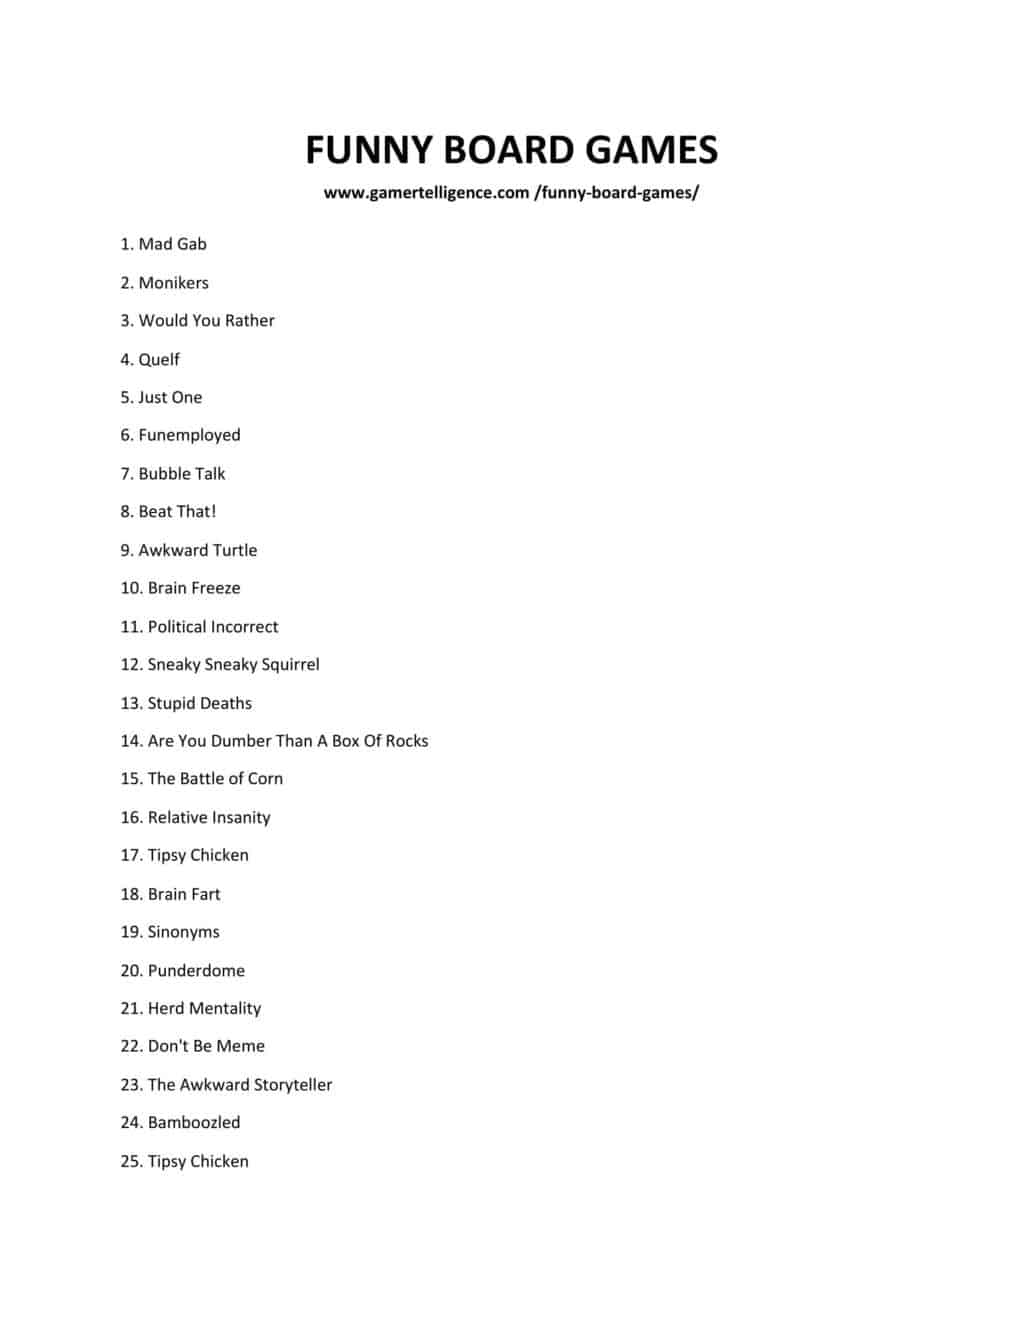 Downloadable list of board games